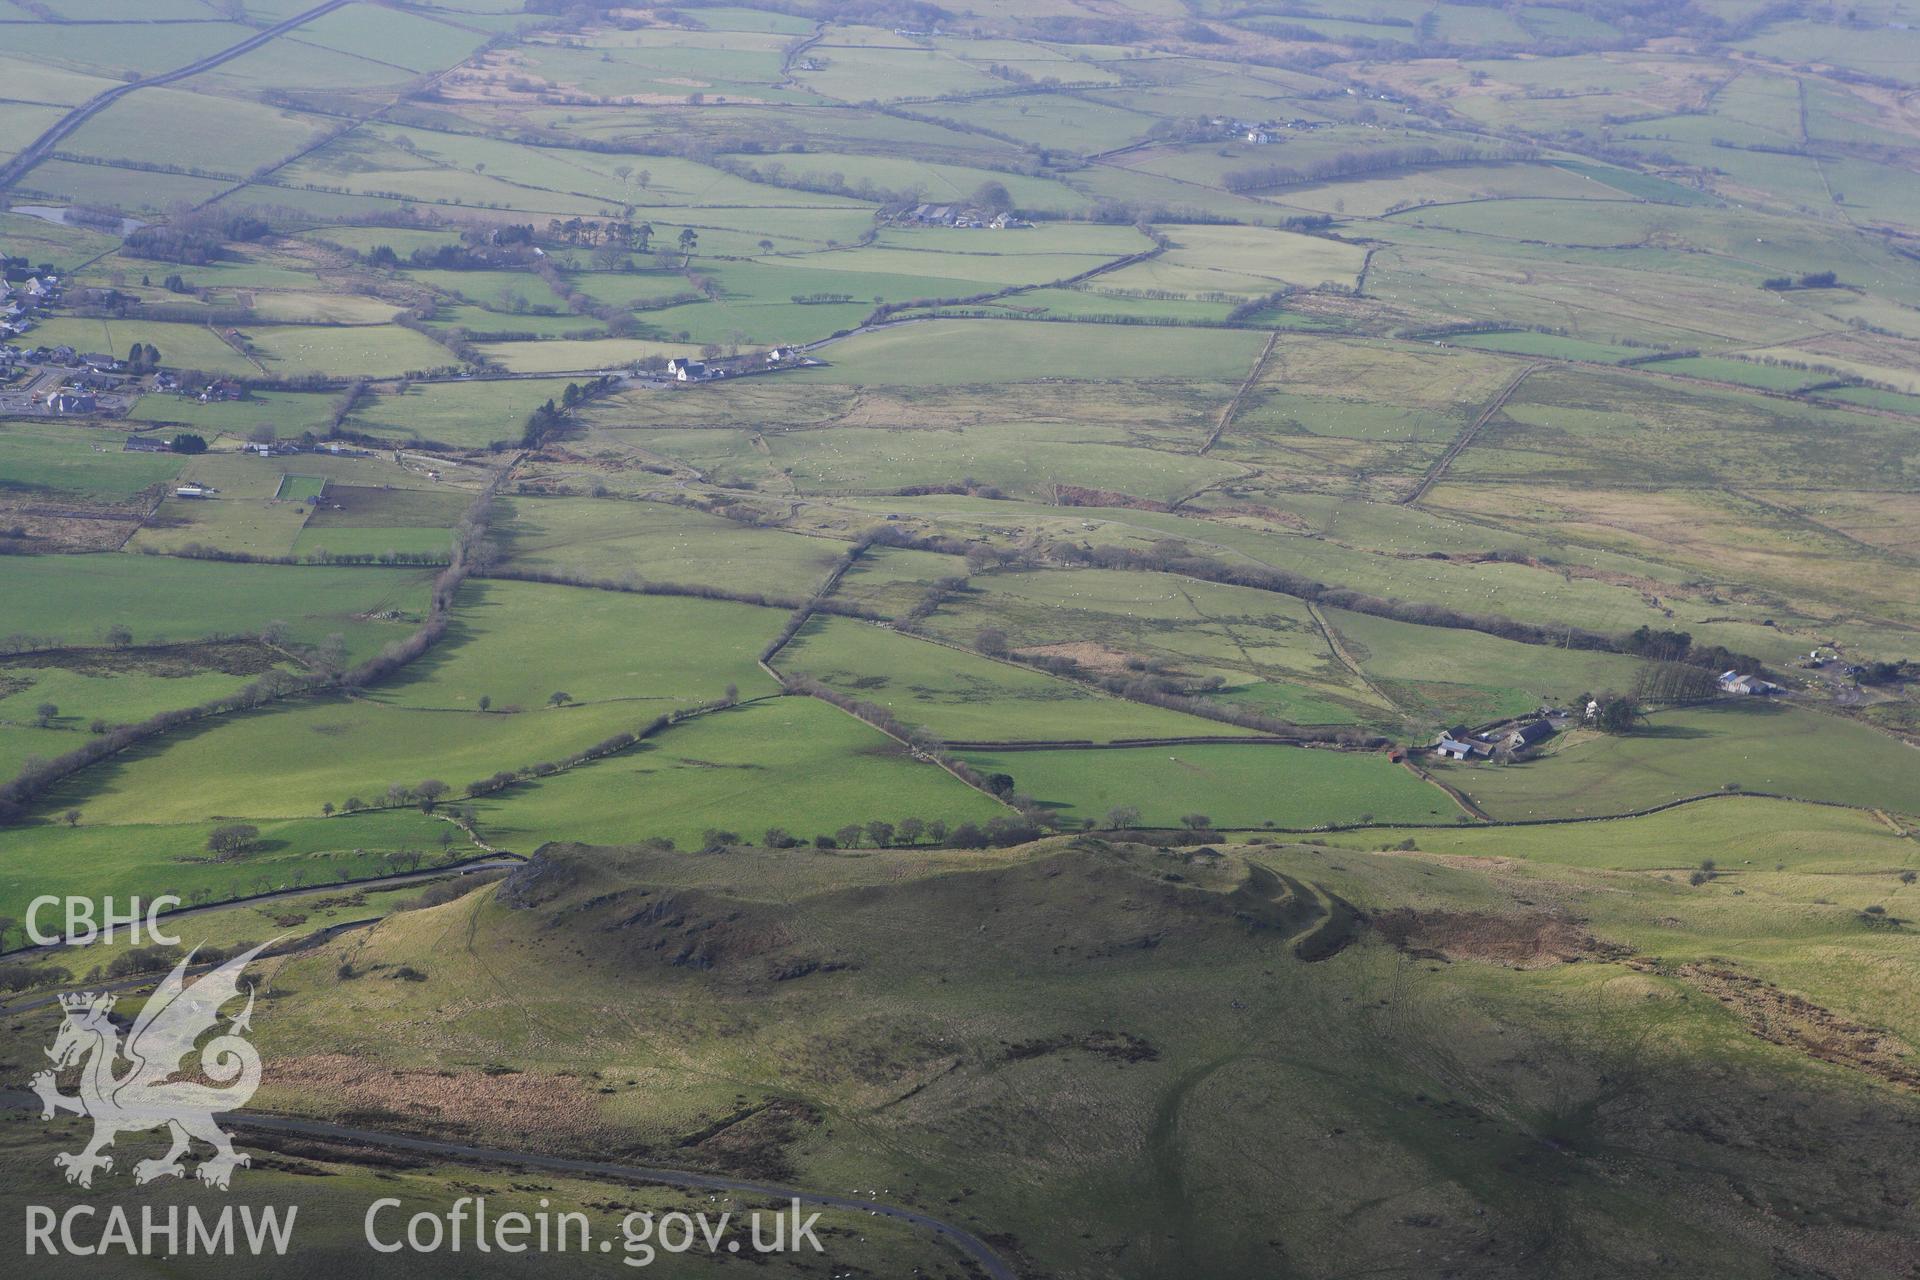 RCAHMW colour oblique photograph of Pen-Y-Bannau Hillfort, View from West. Taken by Toby Driver on 07/02/2012.